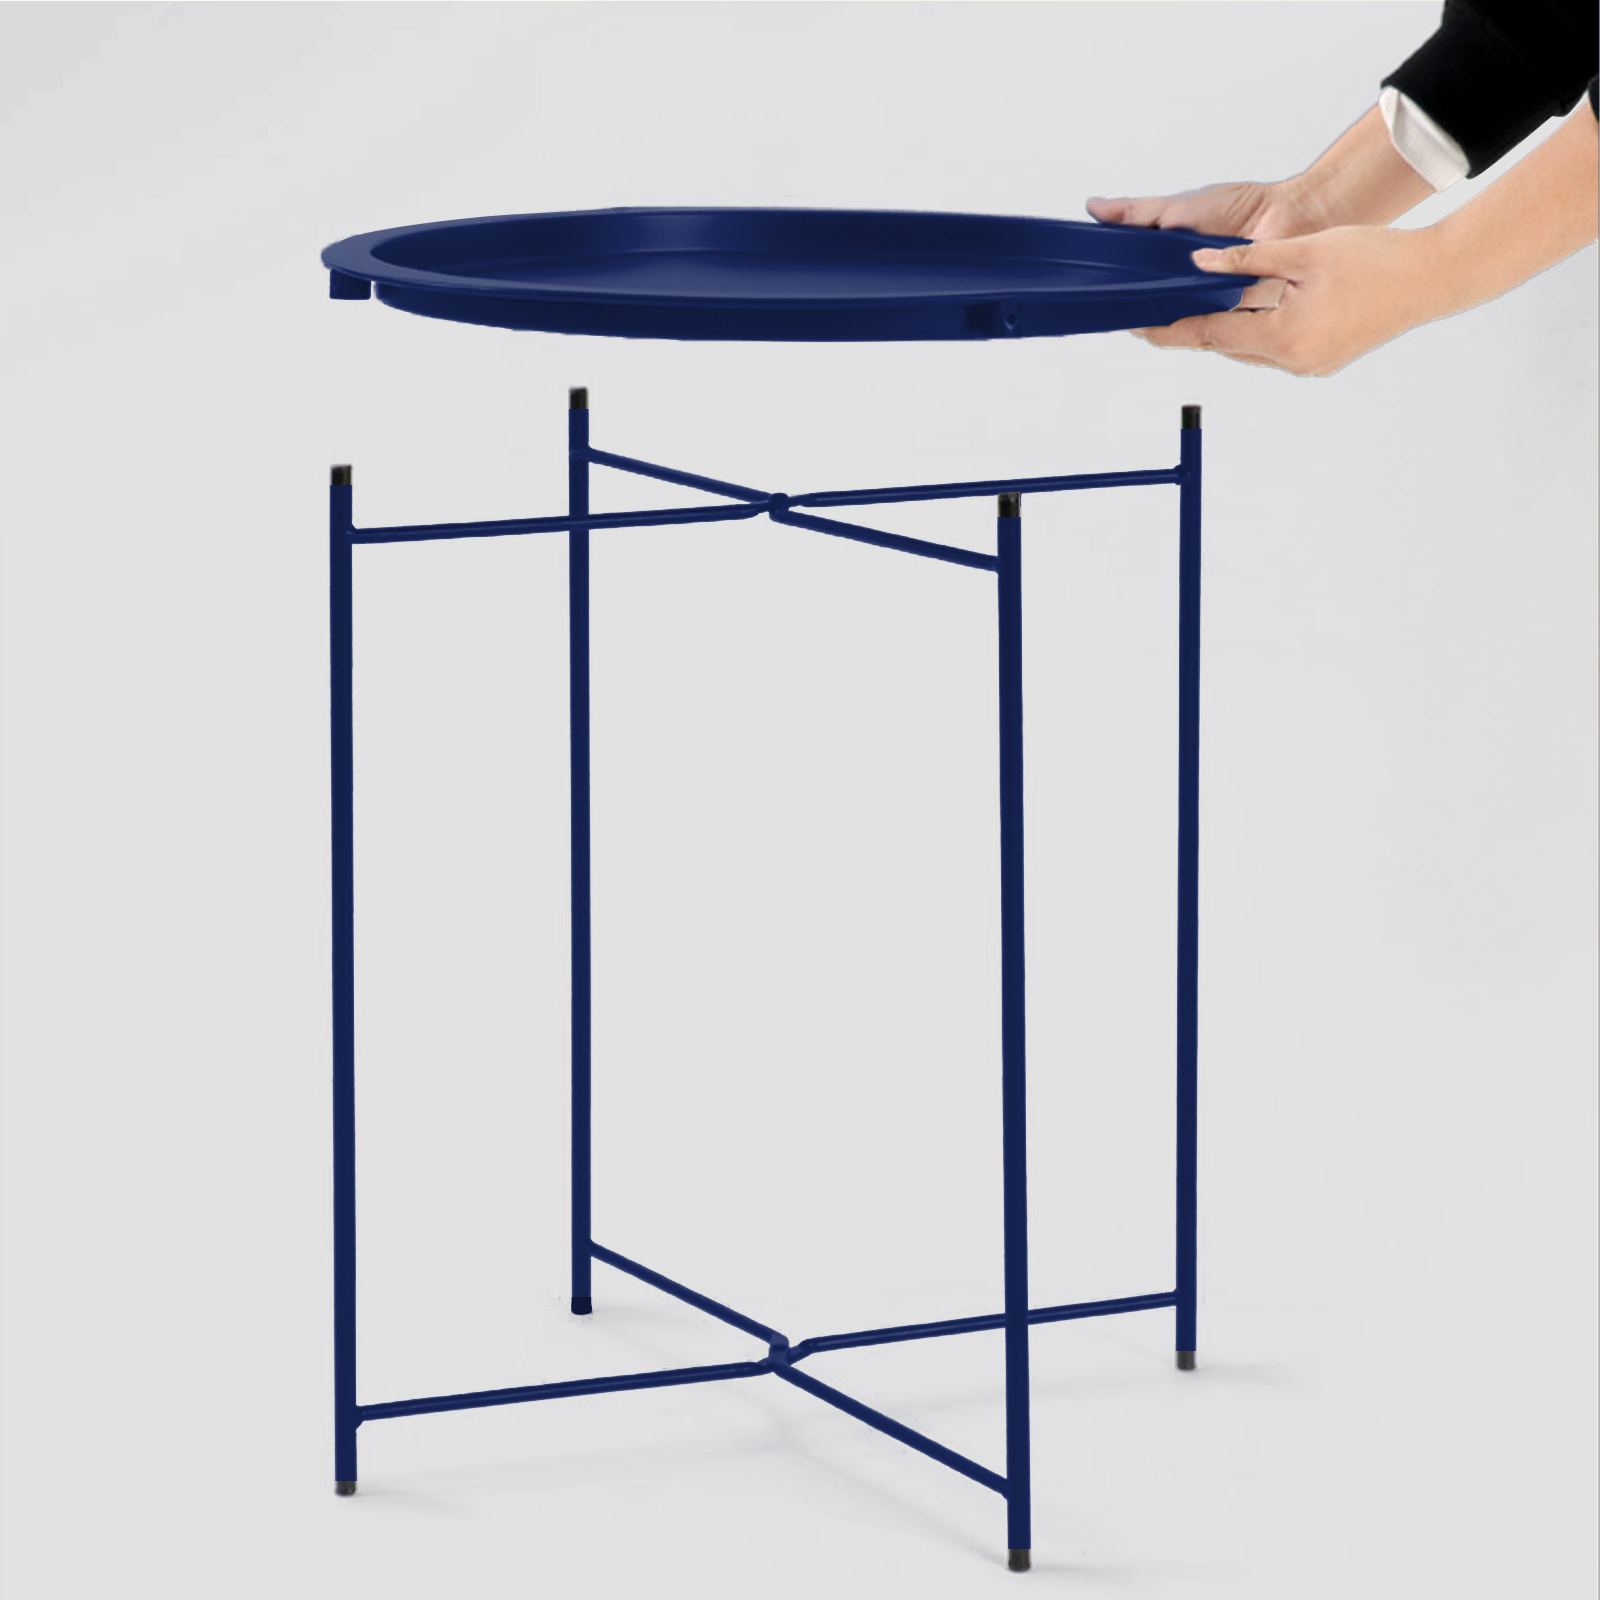 Folding Tray Metal Side Table Round End Table,Dark Blue Sofa Small Accent Fold-able Table, Round End Table Tray, Next to Sofa Table, Snack Table for Living Room and Bed Room - image 5 of 6